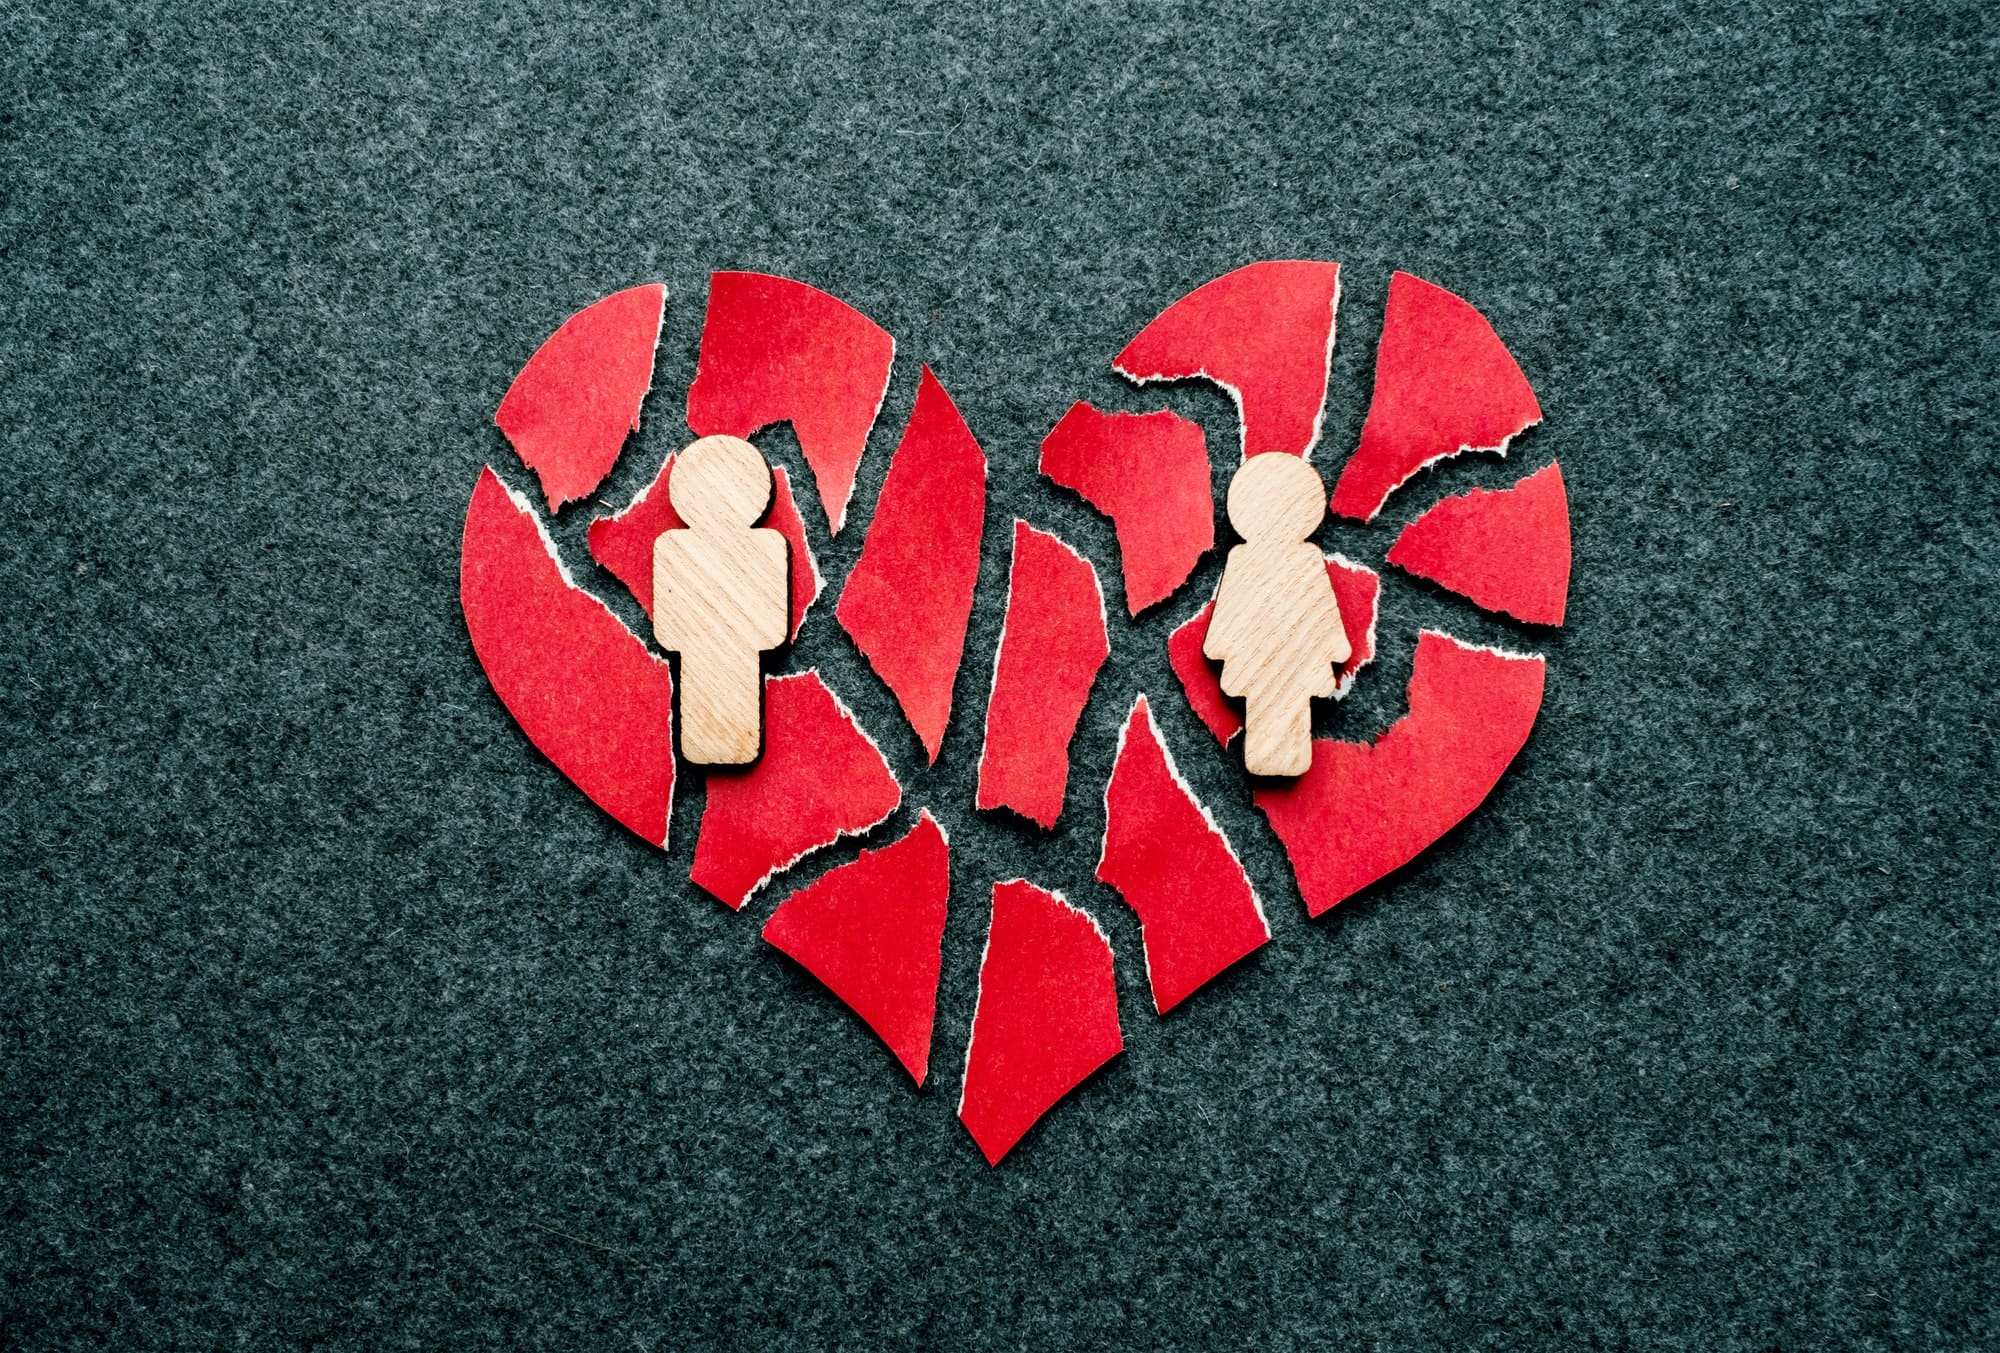 Paper red broken heart with wooden figures of man and woman on dark felt background. Mosaic paper